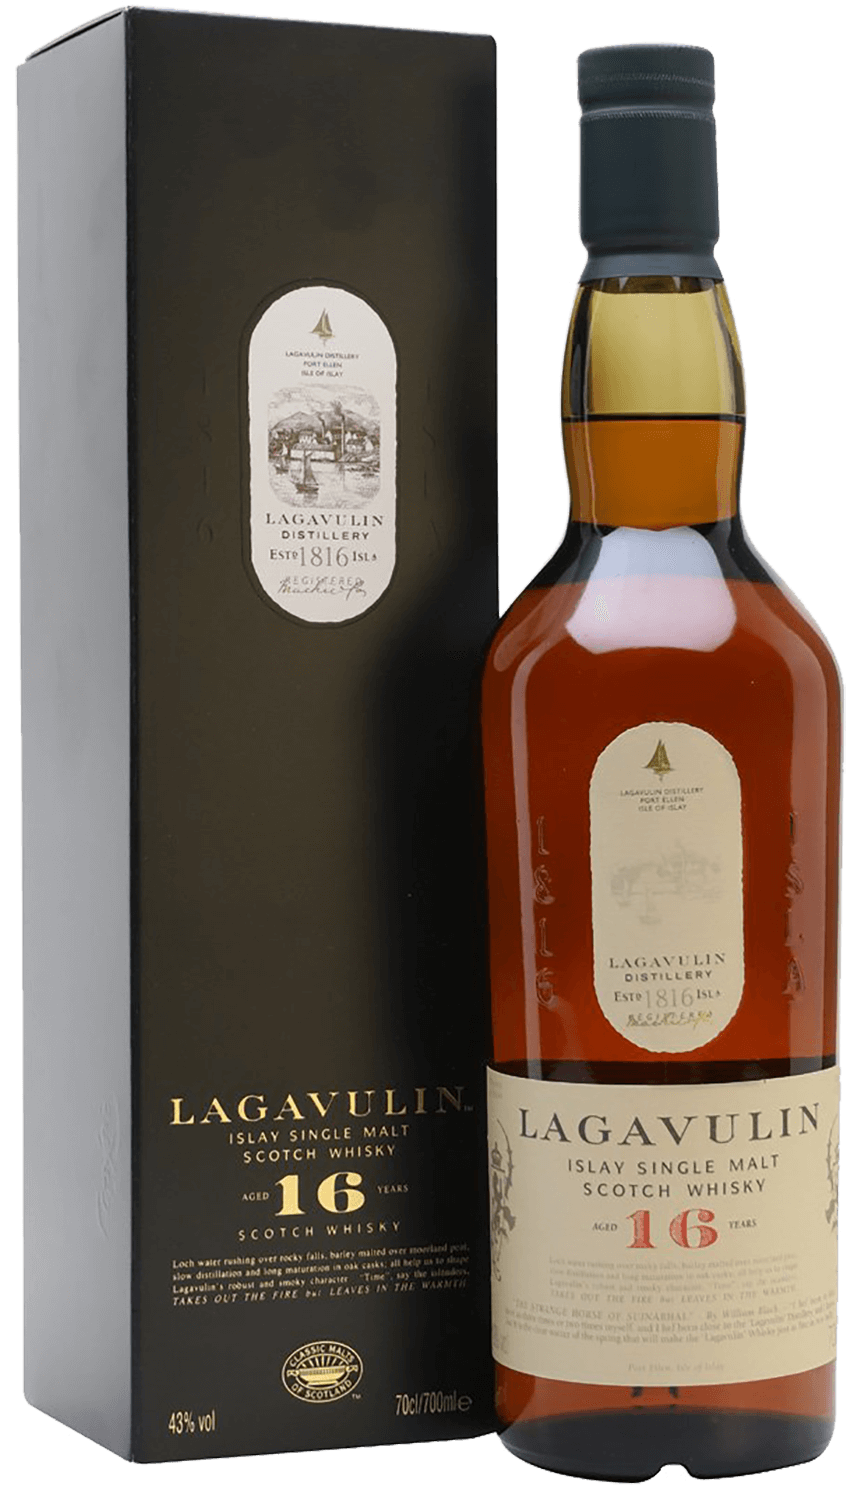 Lagavulin Islay single malt scotch whisky 16 Years Old (gift box) game of thrones house lannister lagavulin 9 y o islay single malt scotch whisky gift box